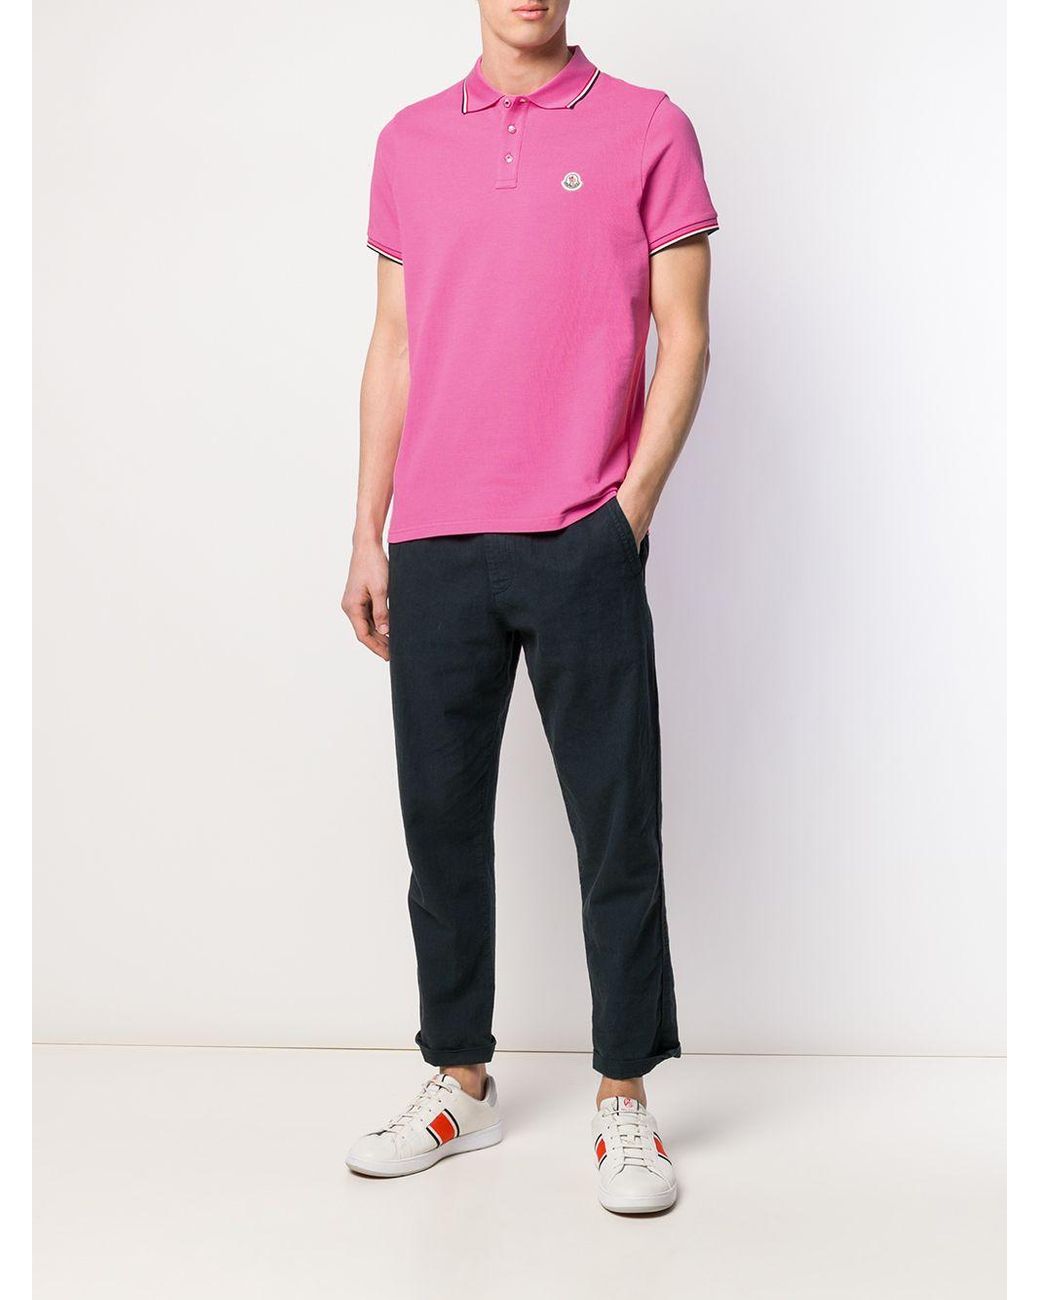 Moncler Short Sleeved Polo Shirt in Pink for Men | Lyst